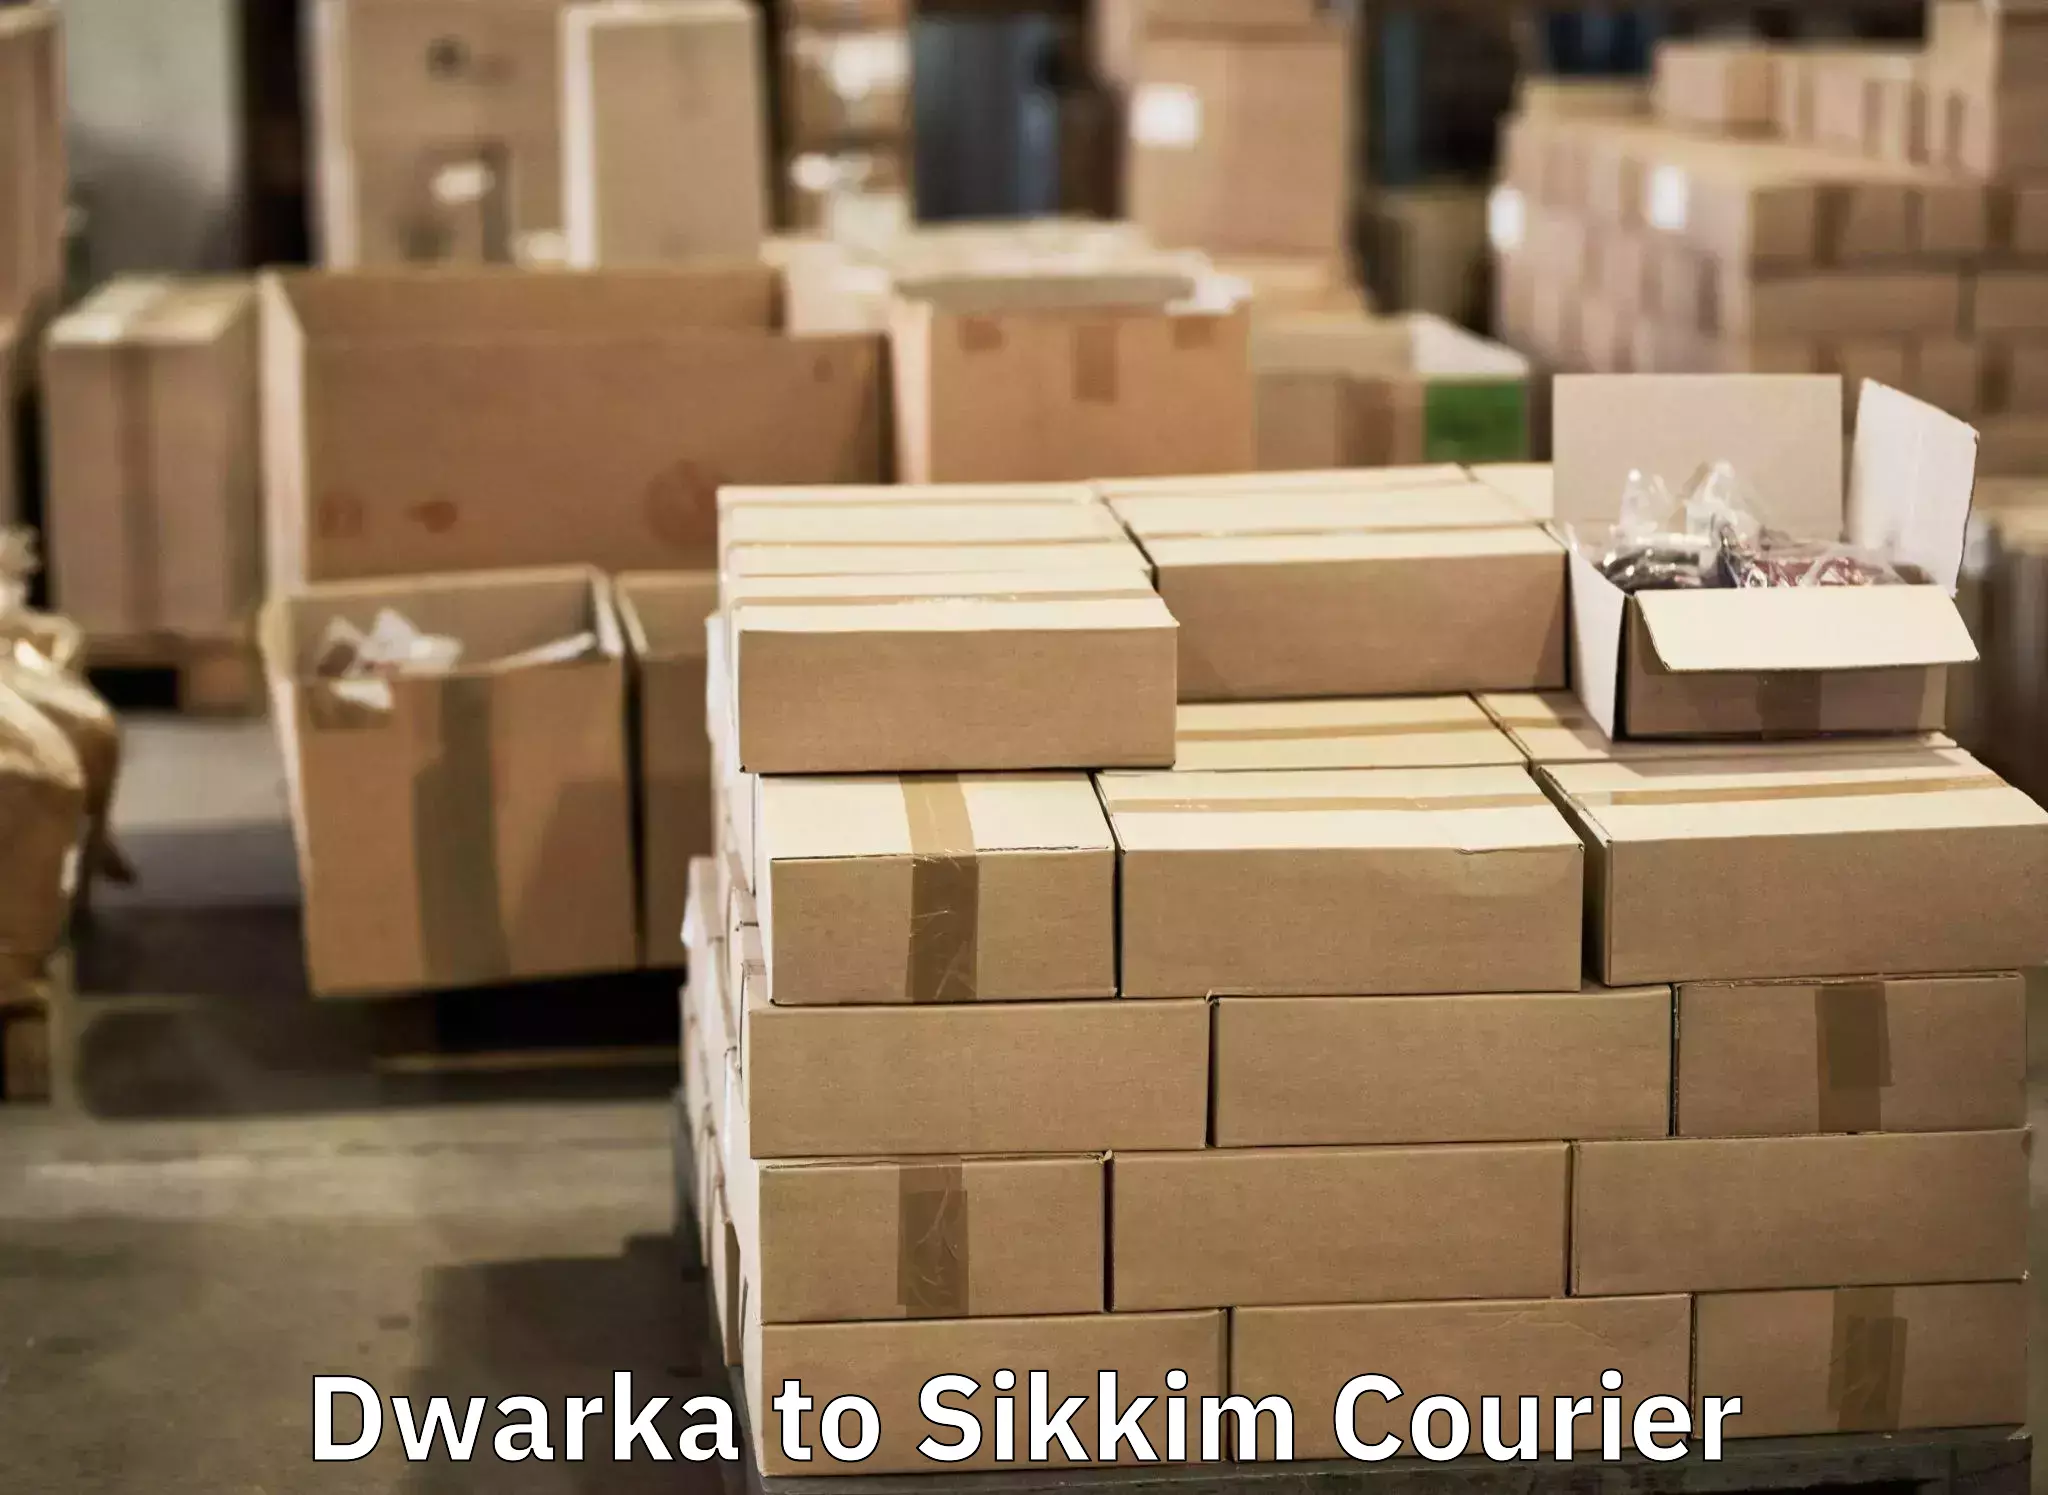 Luggage transport consultancy Dwarka to Pelling